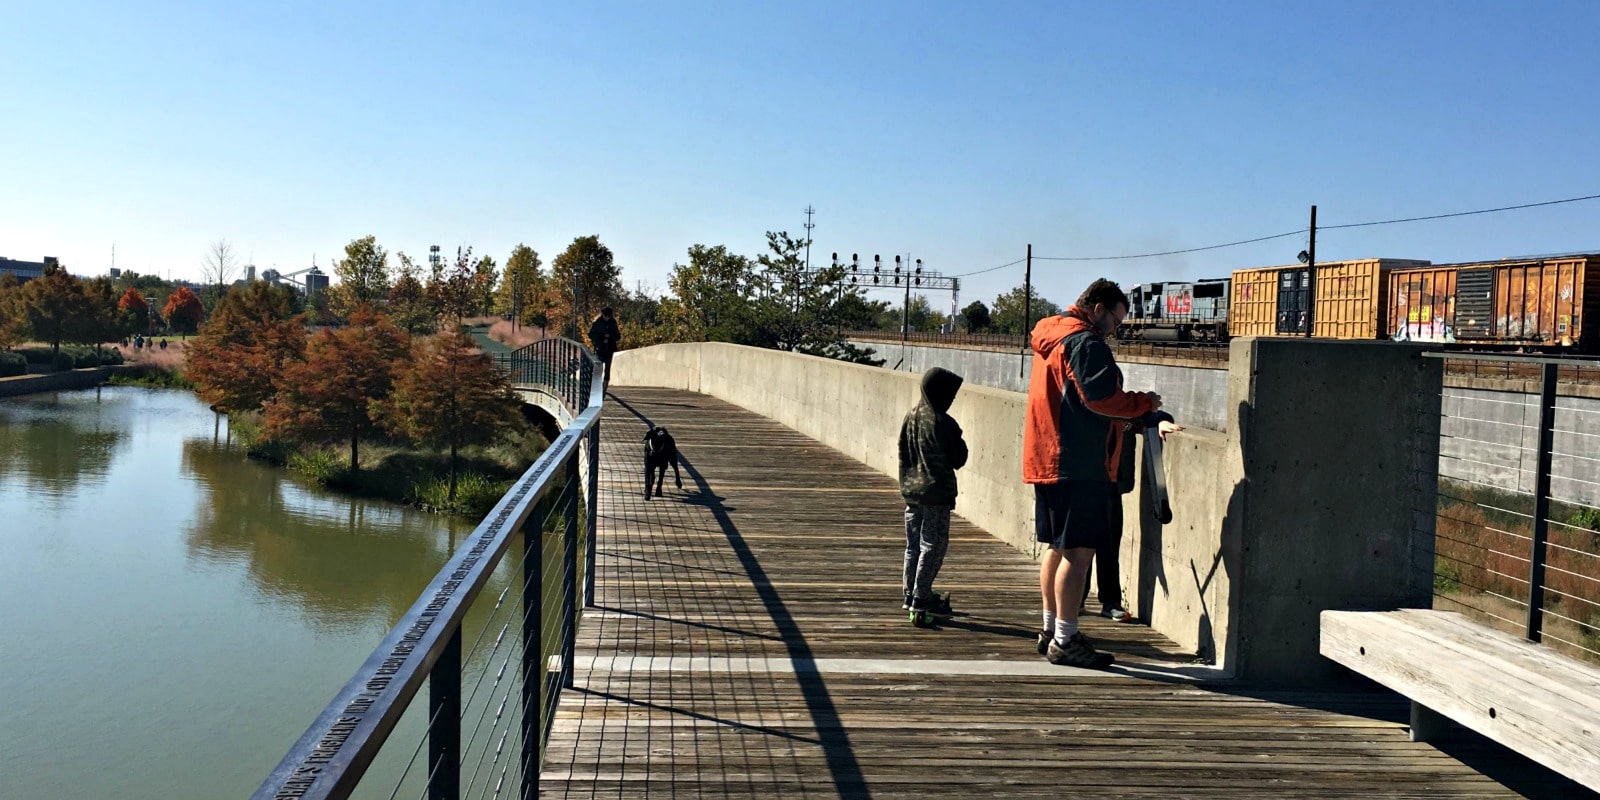 What's open on Christmas Day in Birmingham: Geocaching at Railroad Park